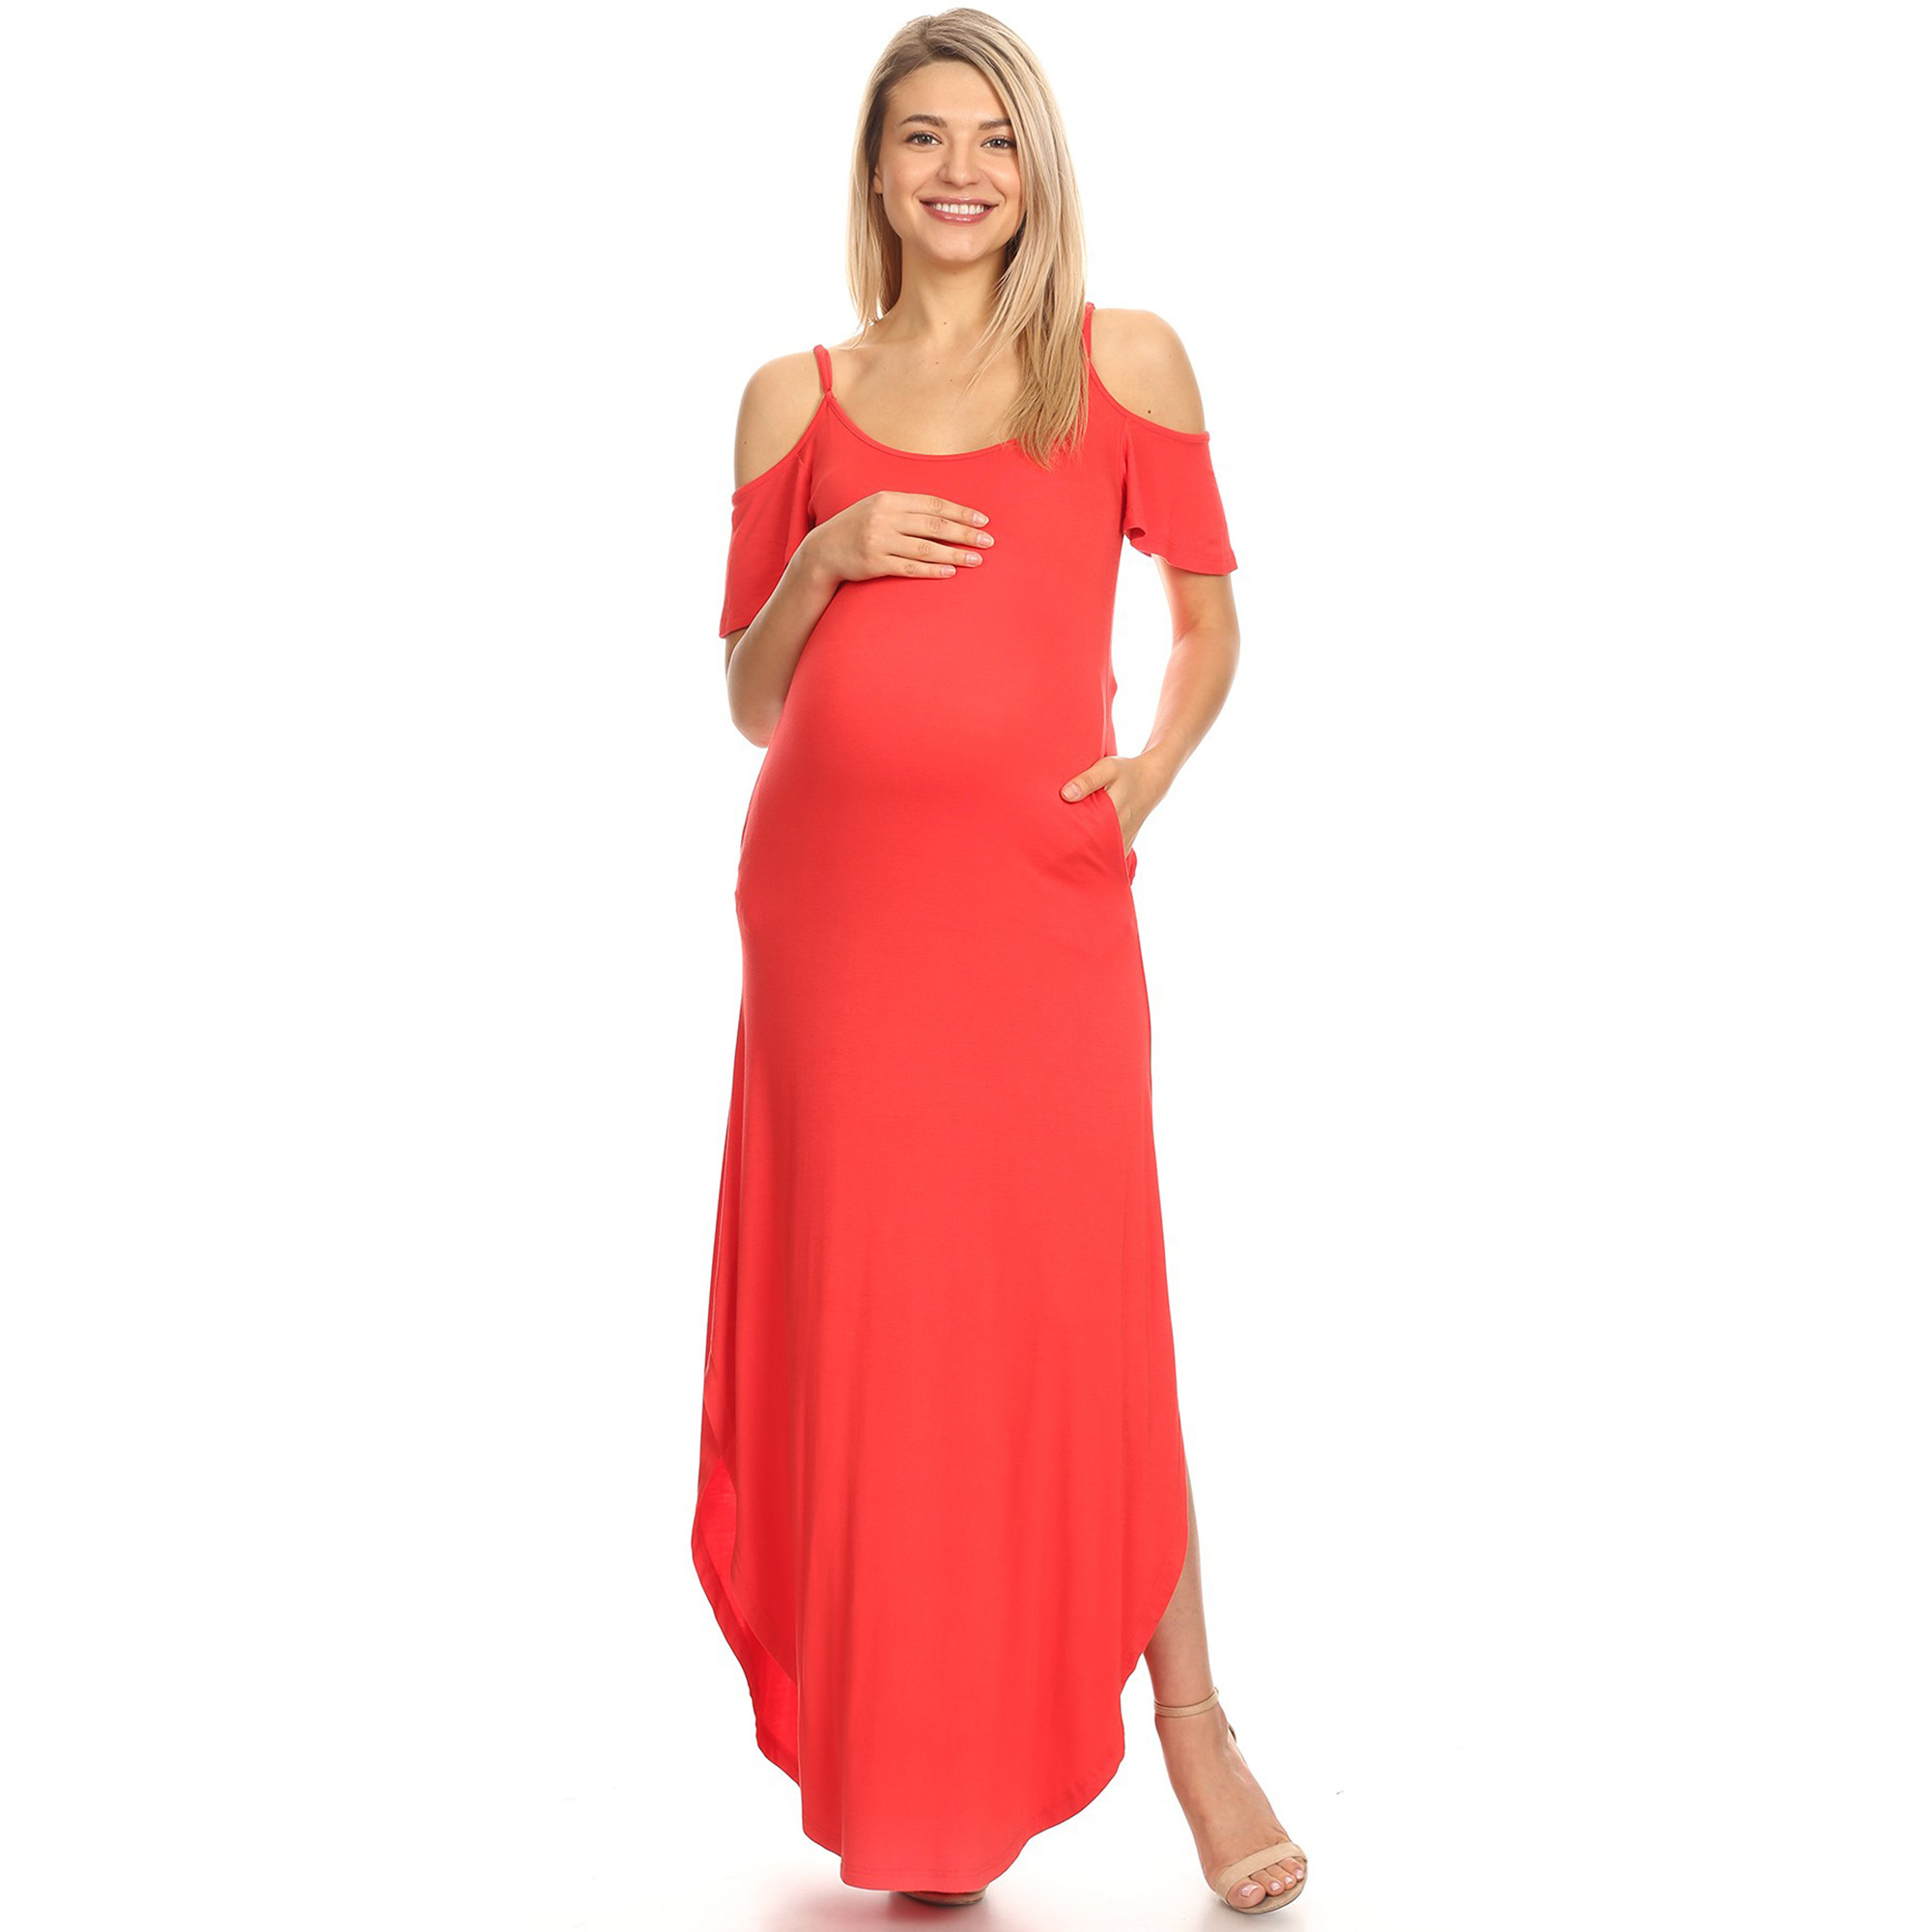 White Mark Women's Maternity Cold Shoulder Maxi Dress - Red, 1X